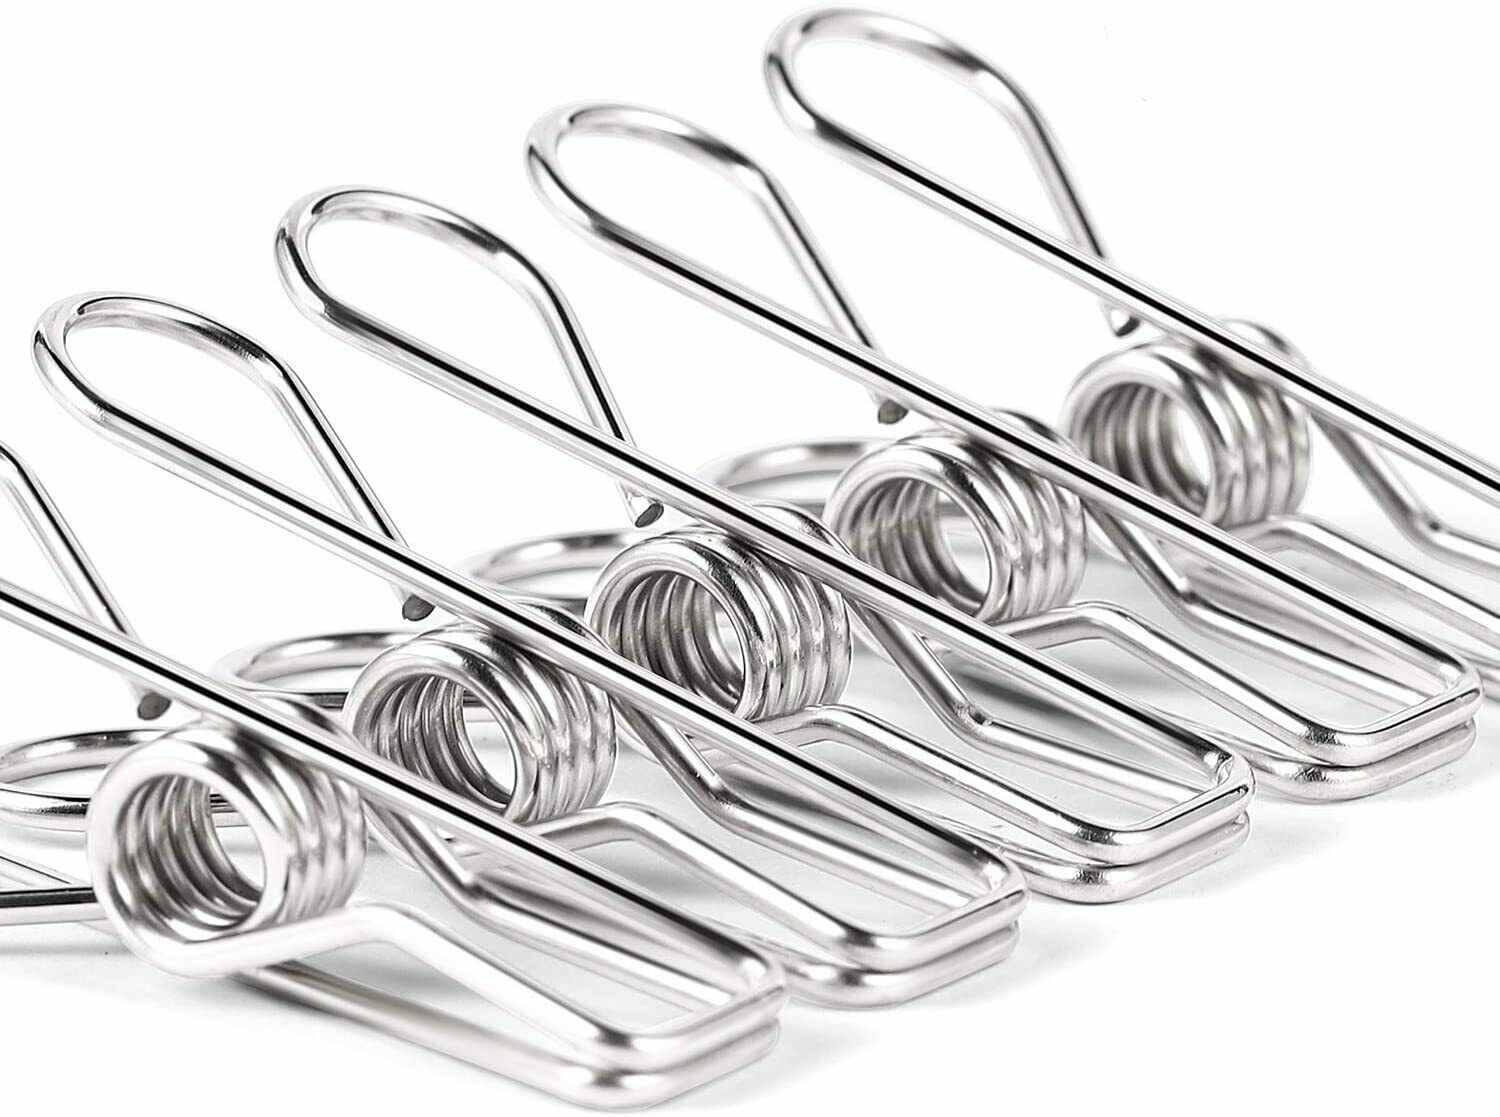 Clothes Pins For Laundry Clips - 28 Pack Heavy Duty Multipurpose Stainless Steel